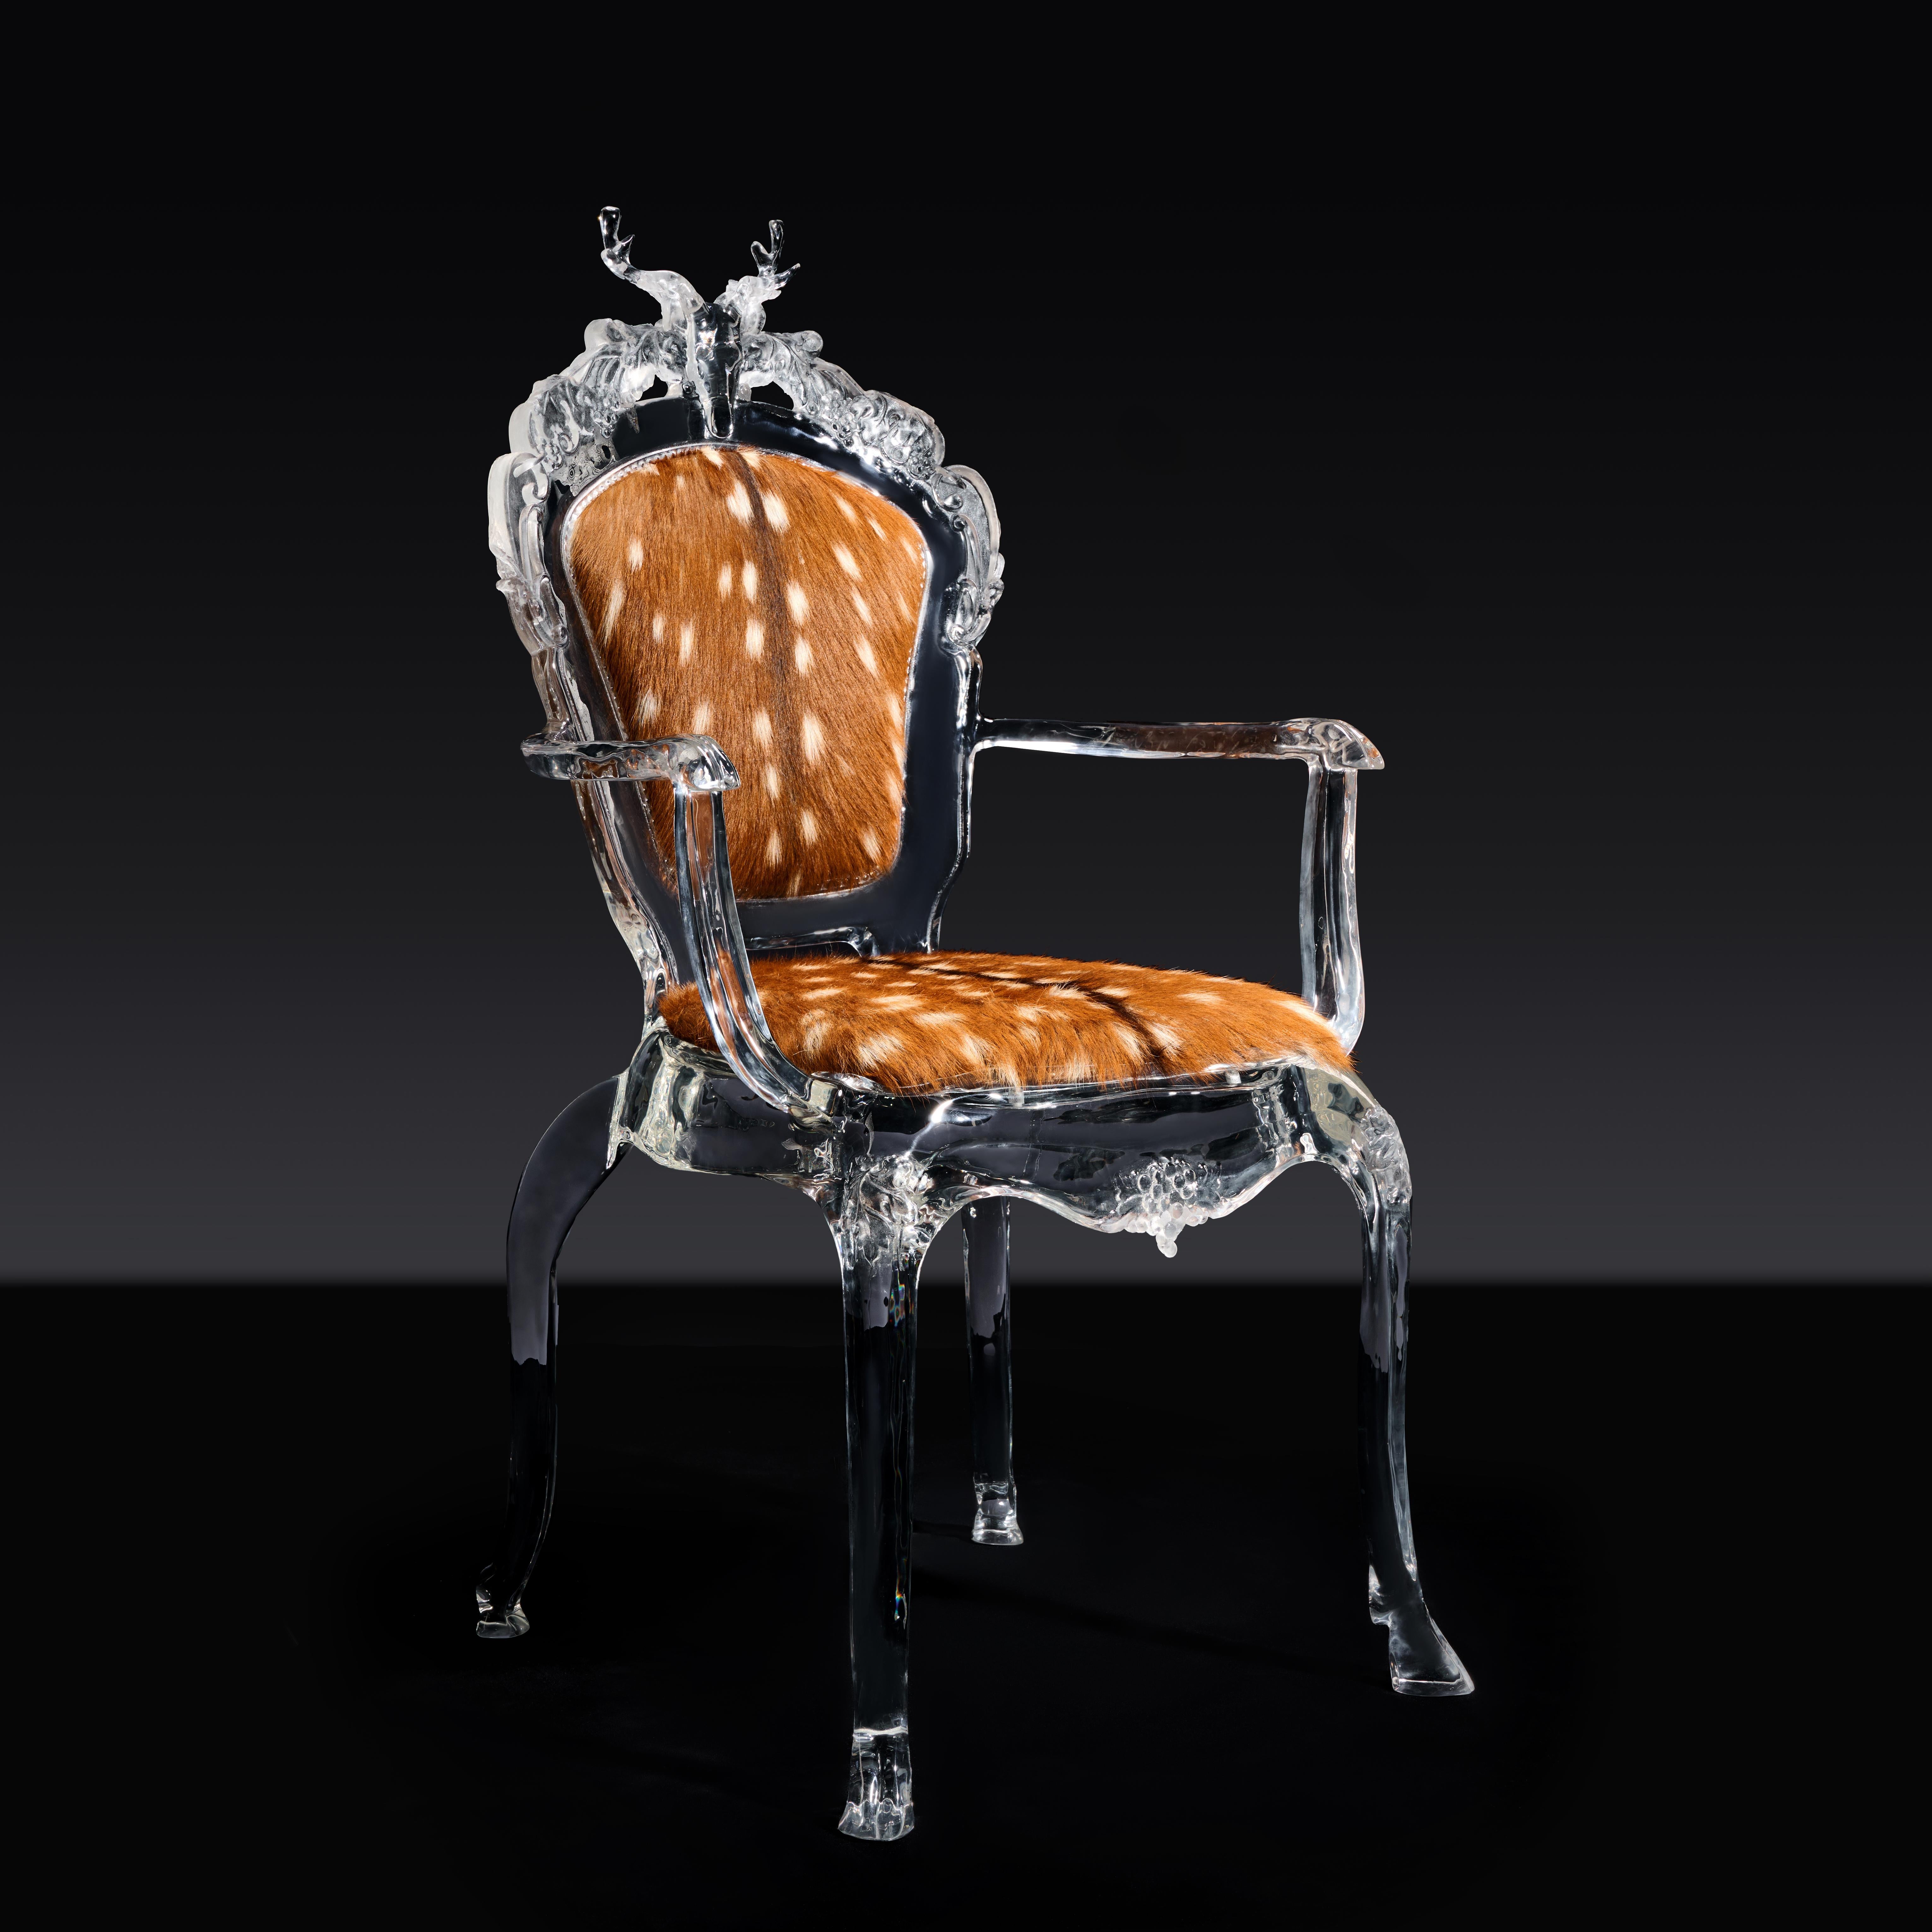 Chinese Deer Sculpture Art Chair, Rococo Style Antique Chair with Crystal by GORDON GU For Sale